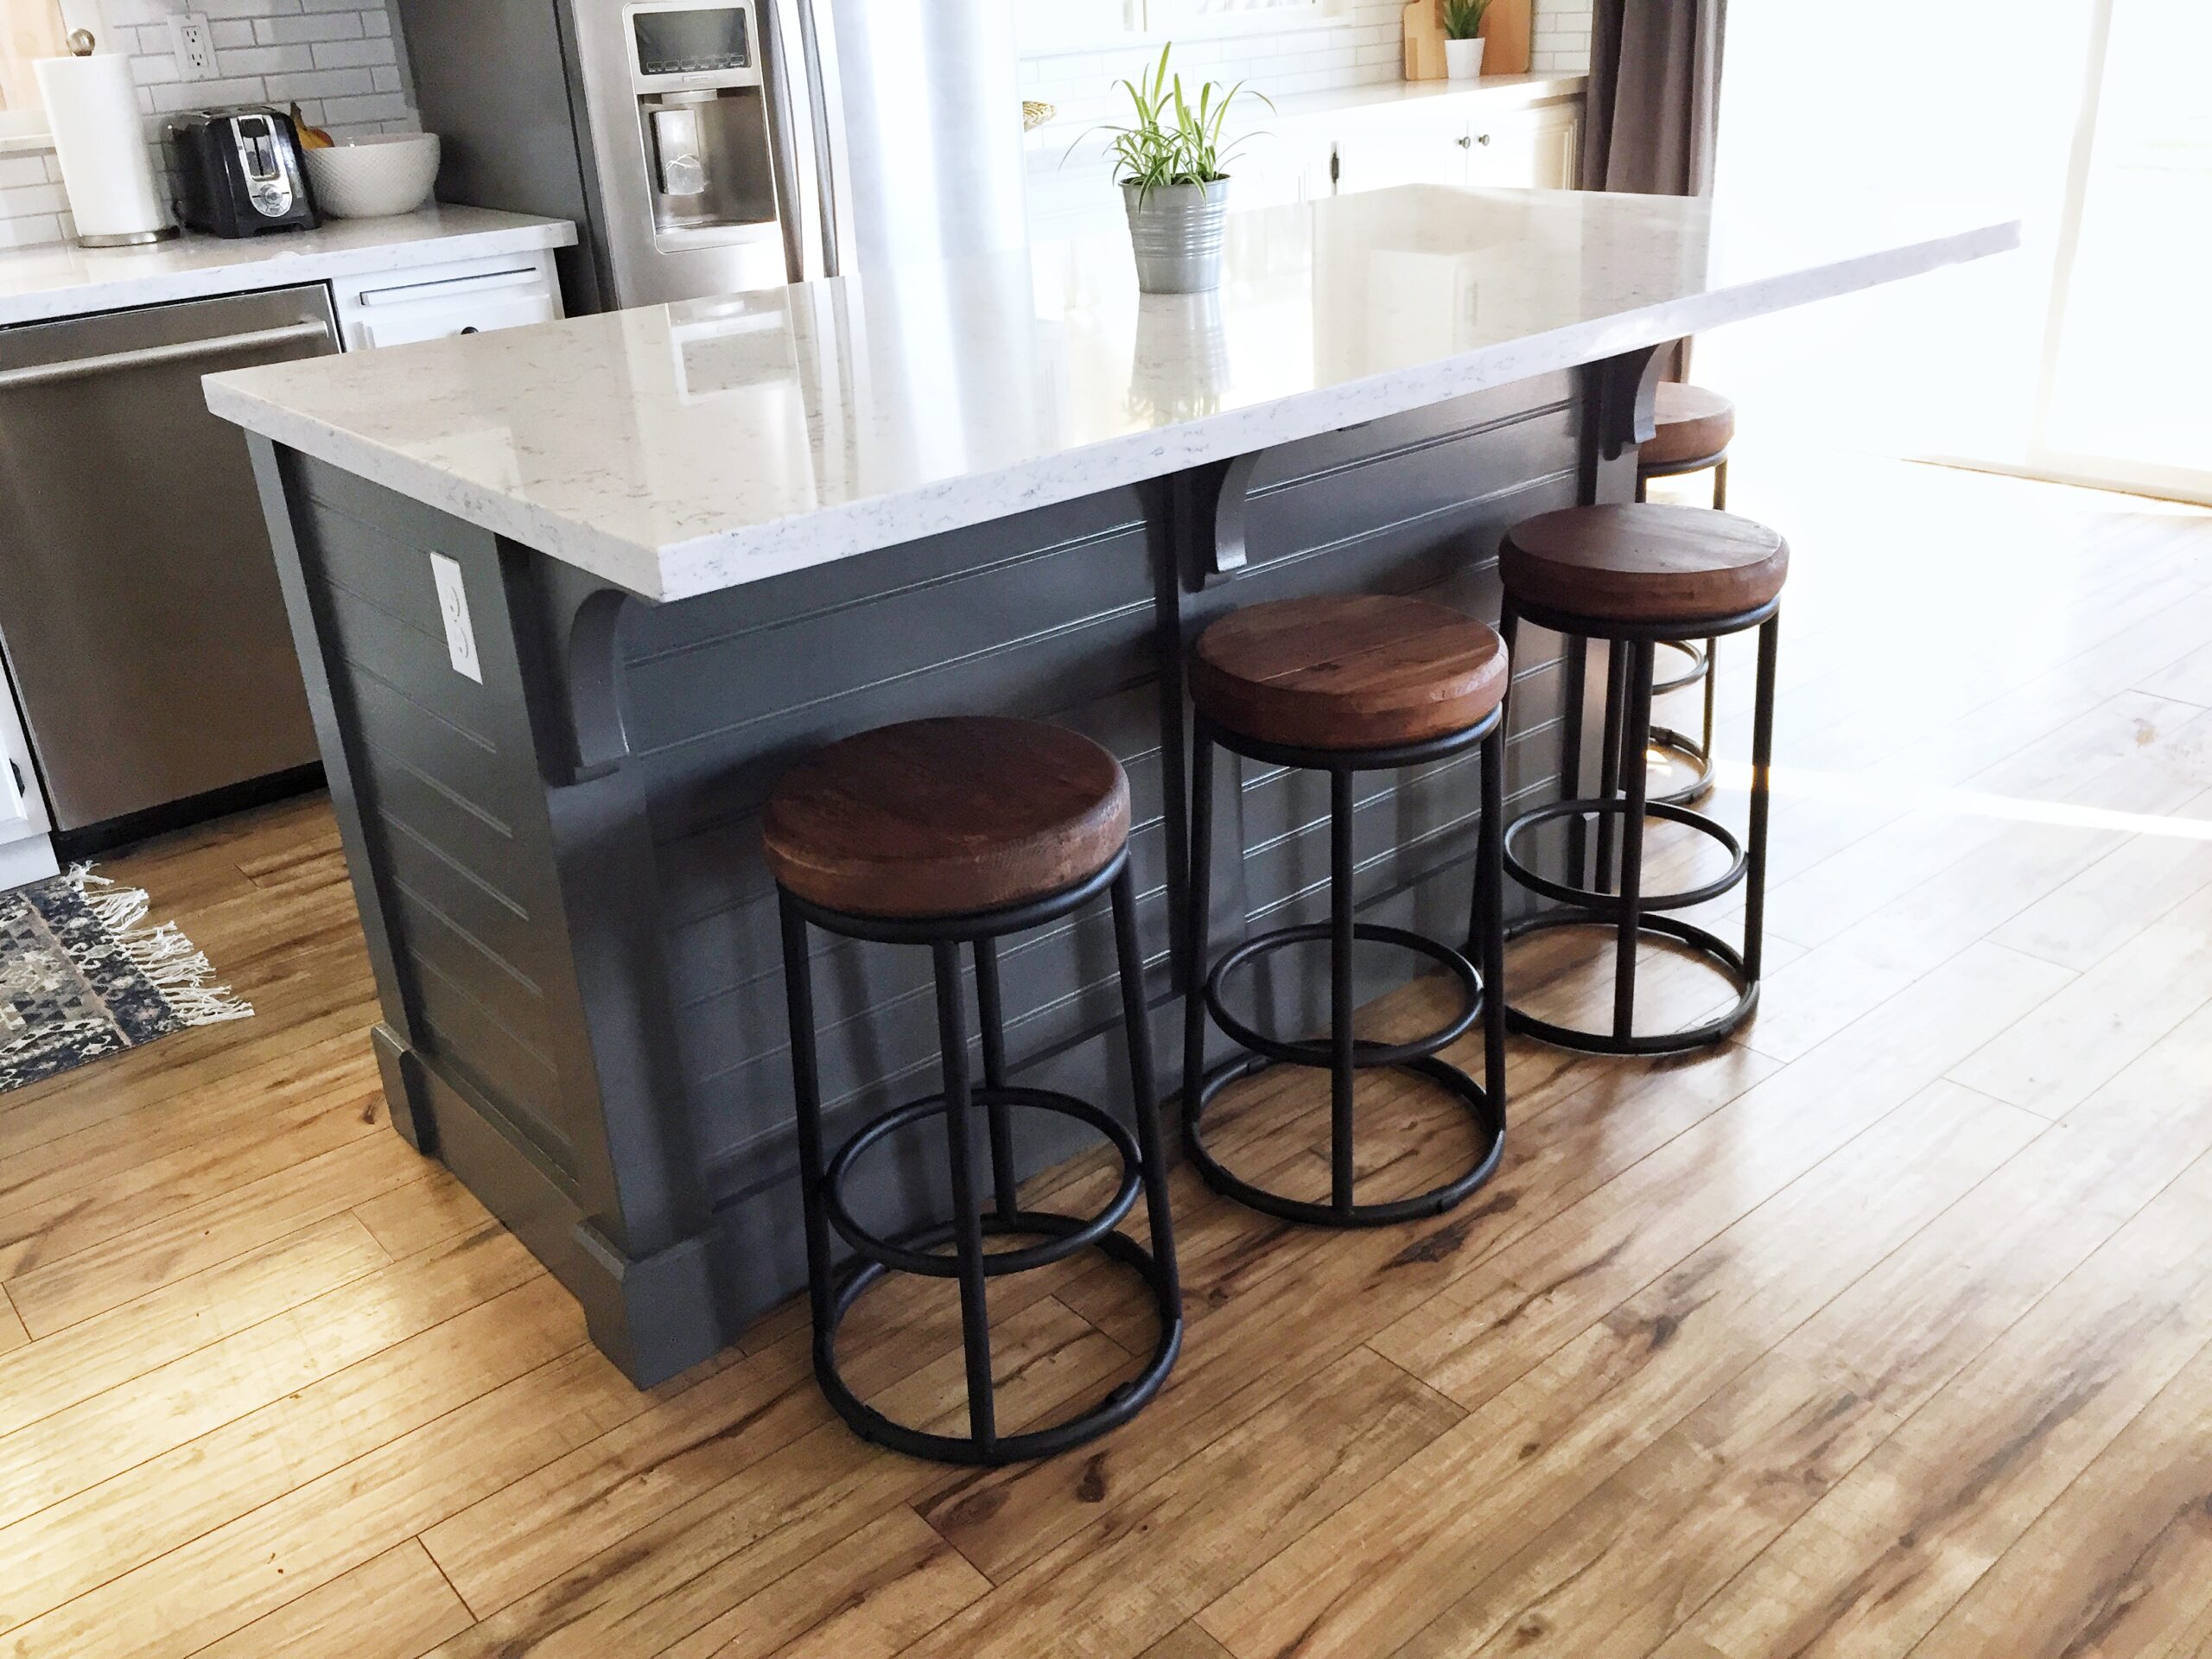 A Diy Kitchen Island Make It Yourself, How Much Space For Stools Around Island